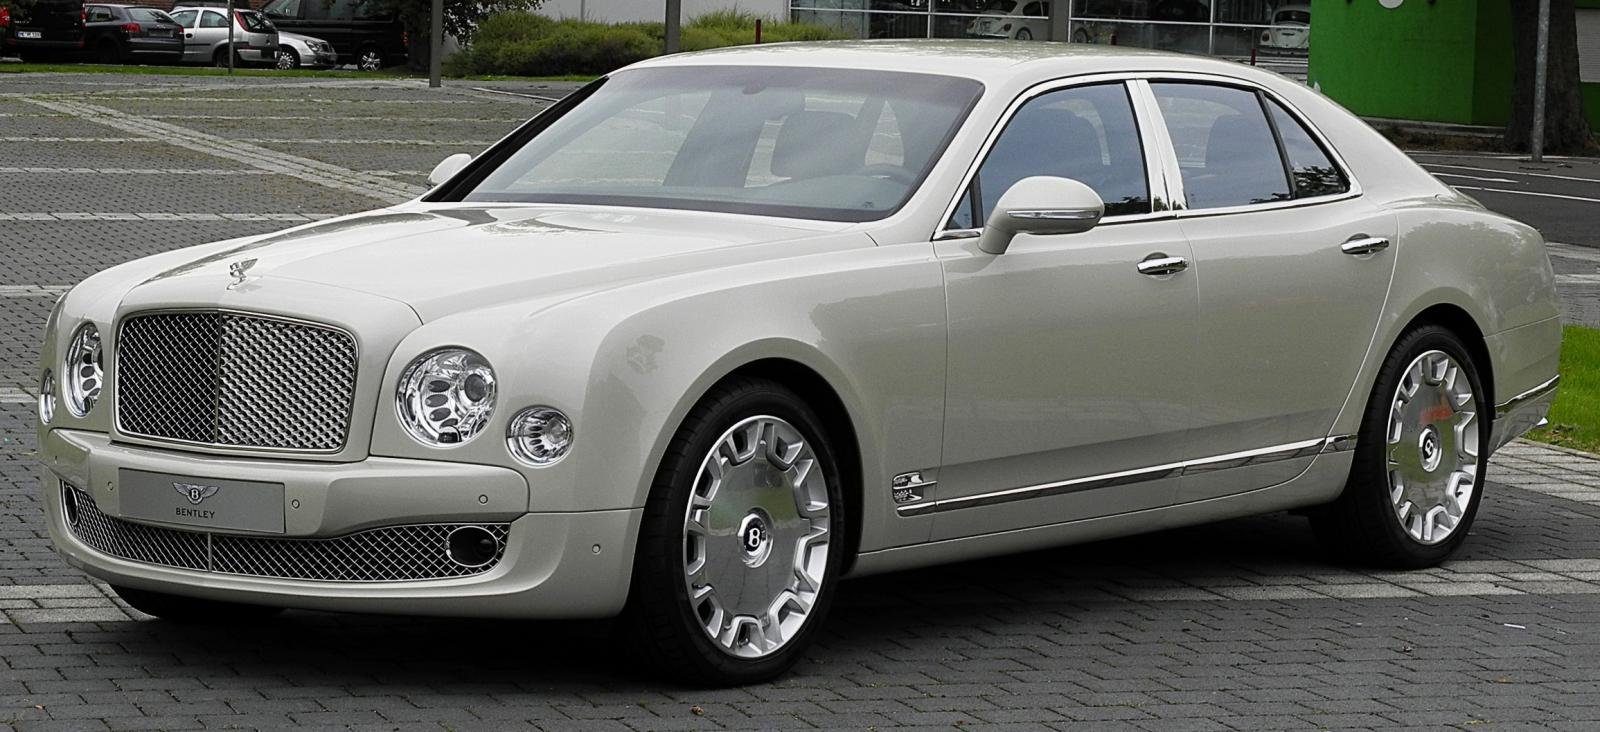 15 Most Expensive Cars in India - Bentley Mulsanne